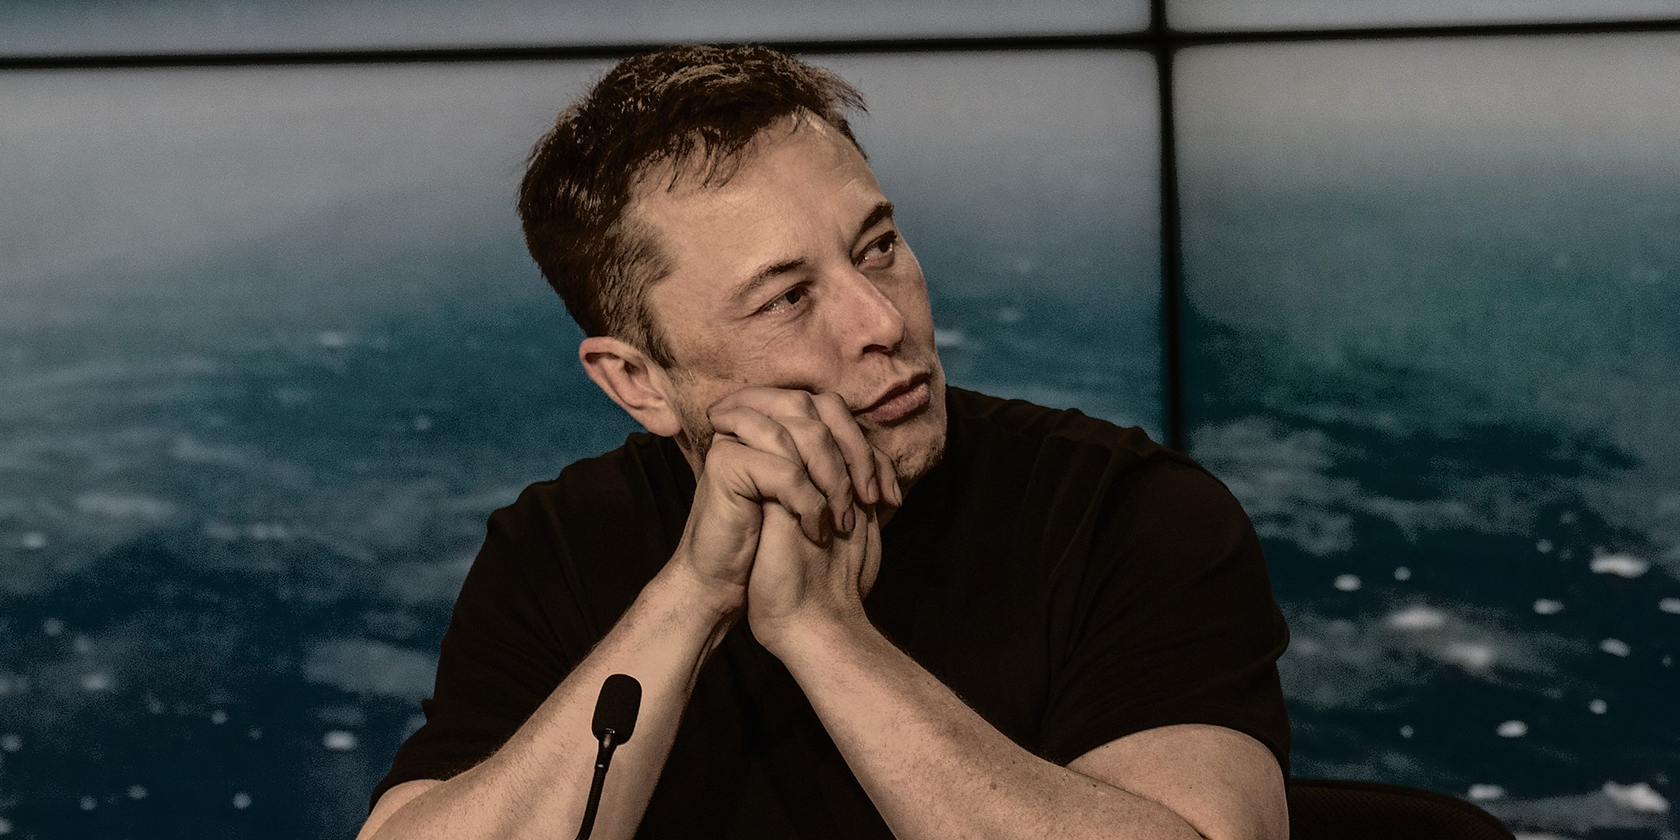 Why Does Elon Musk Want to Pause AI Development?